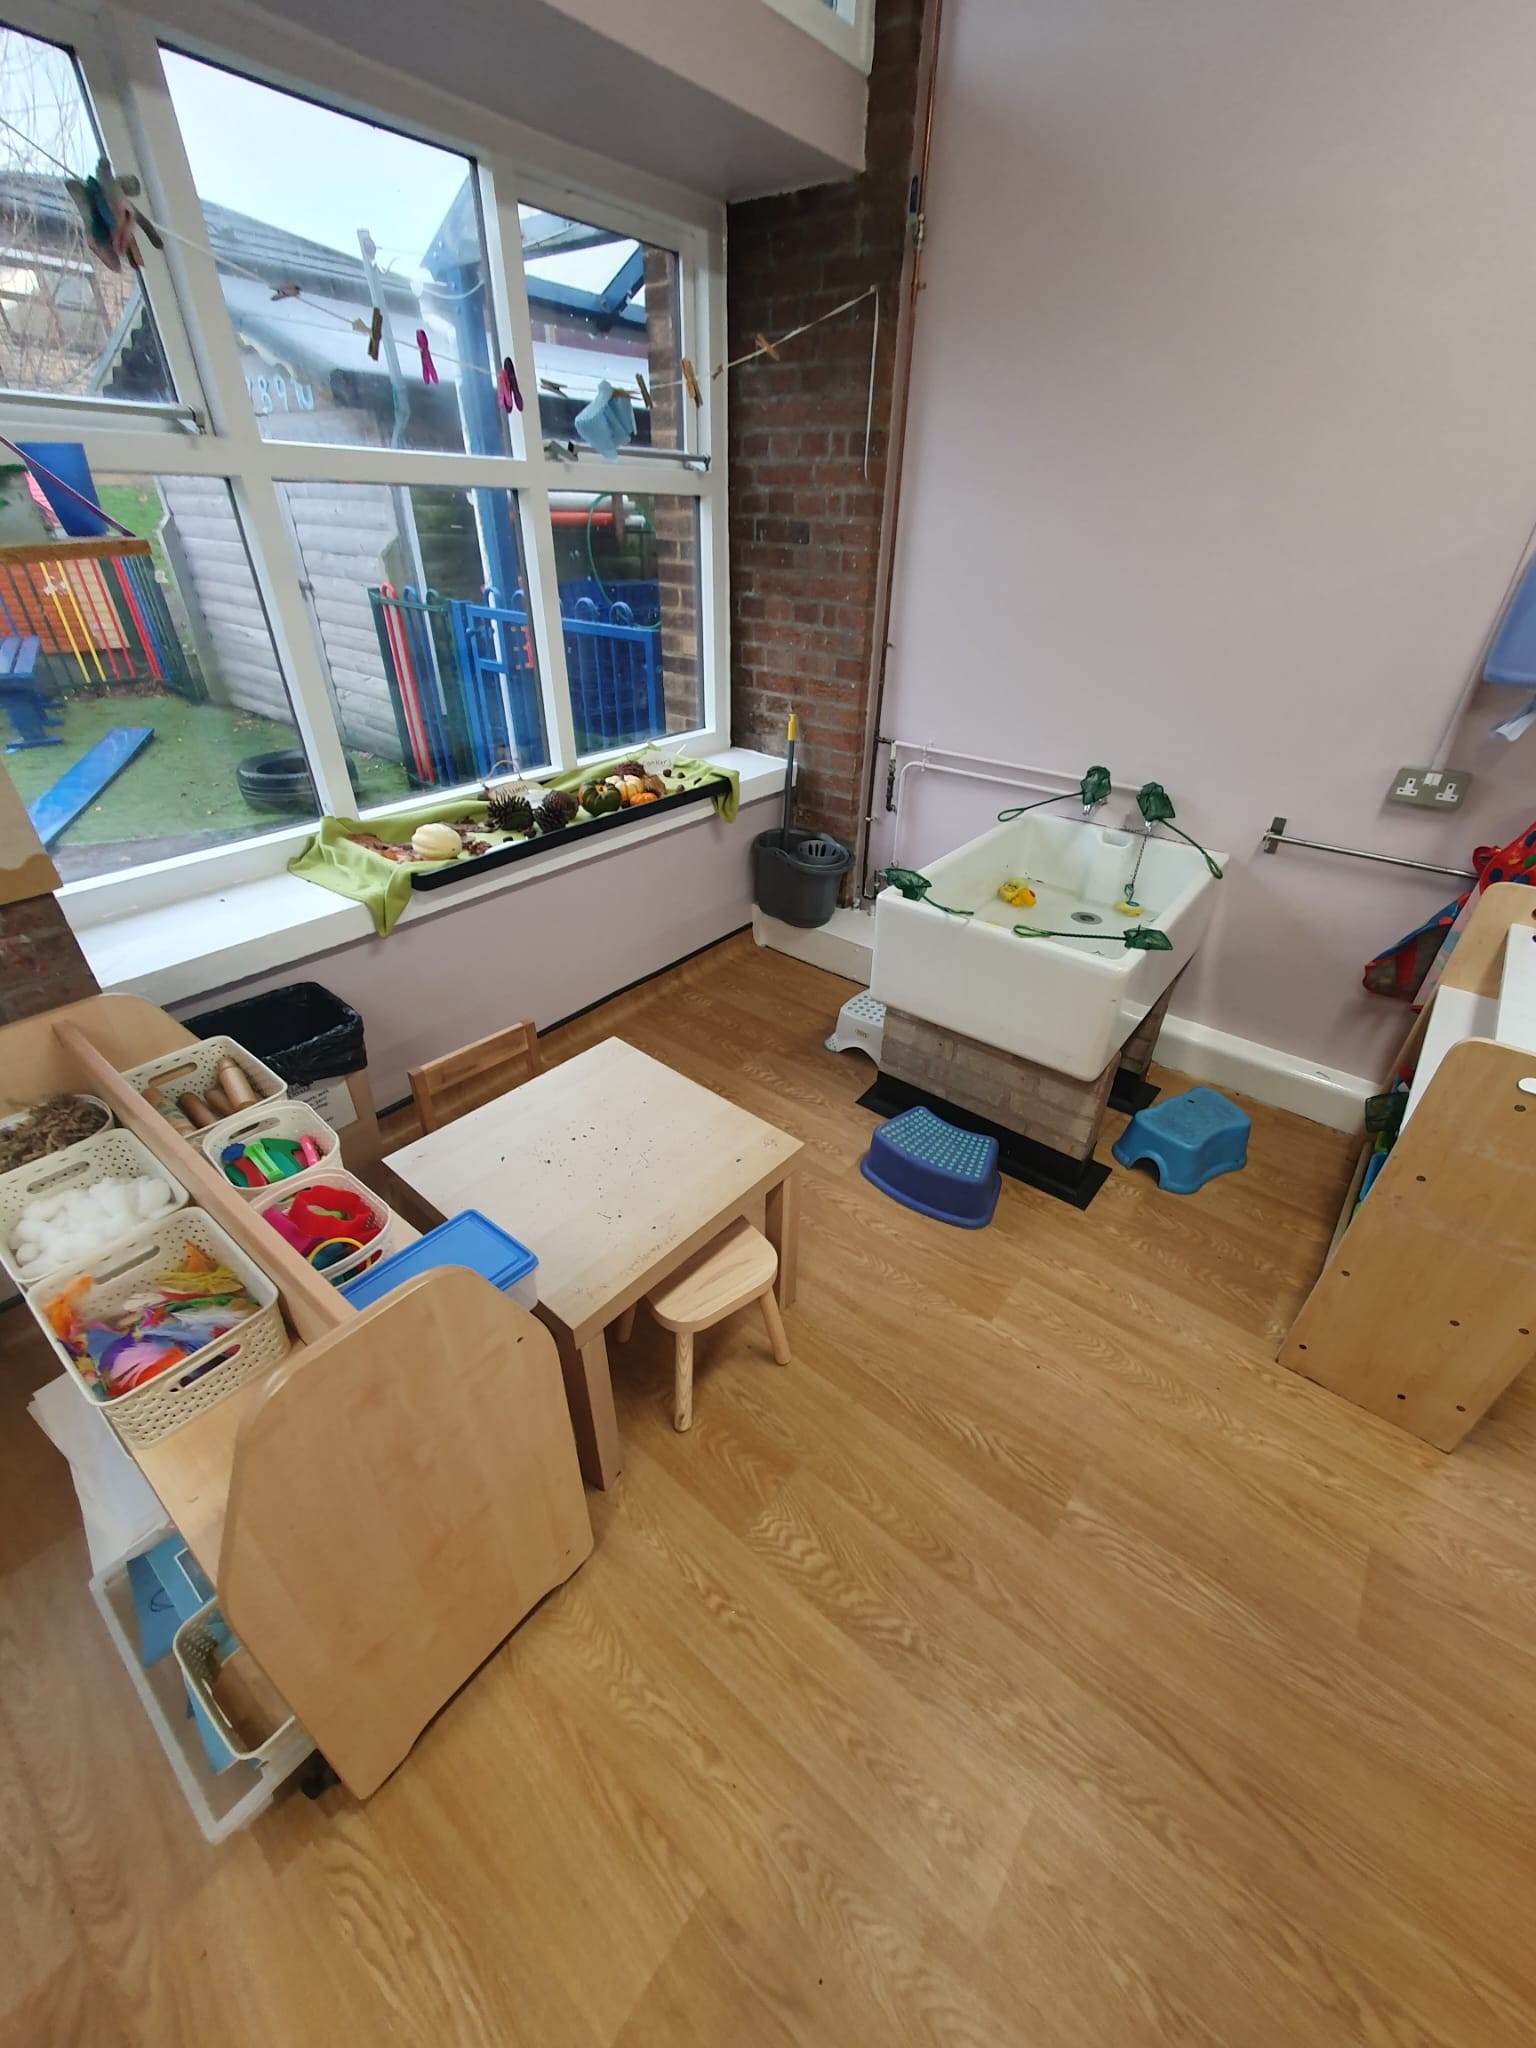 Pre-school setting, showing tables, sink and window looking out on to outdoor area, Moorside Pre-School - Nursery Education Lancaster